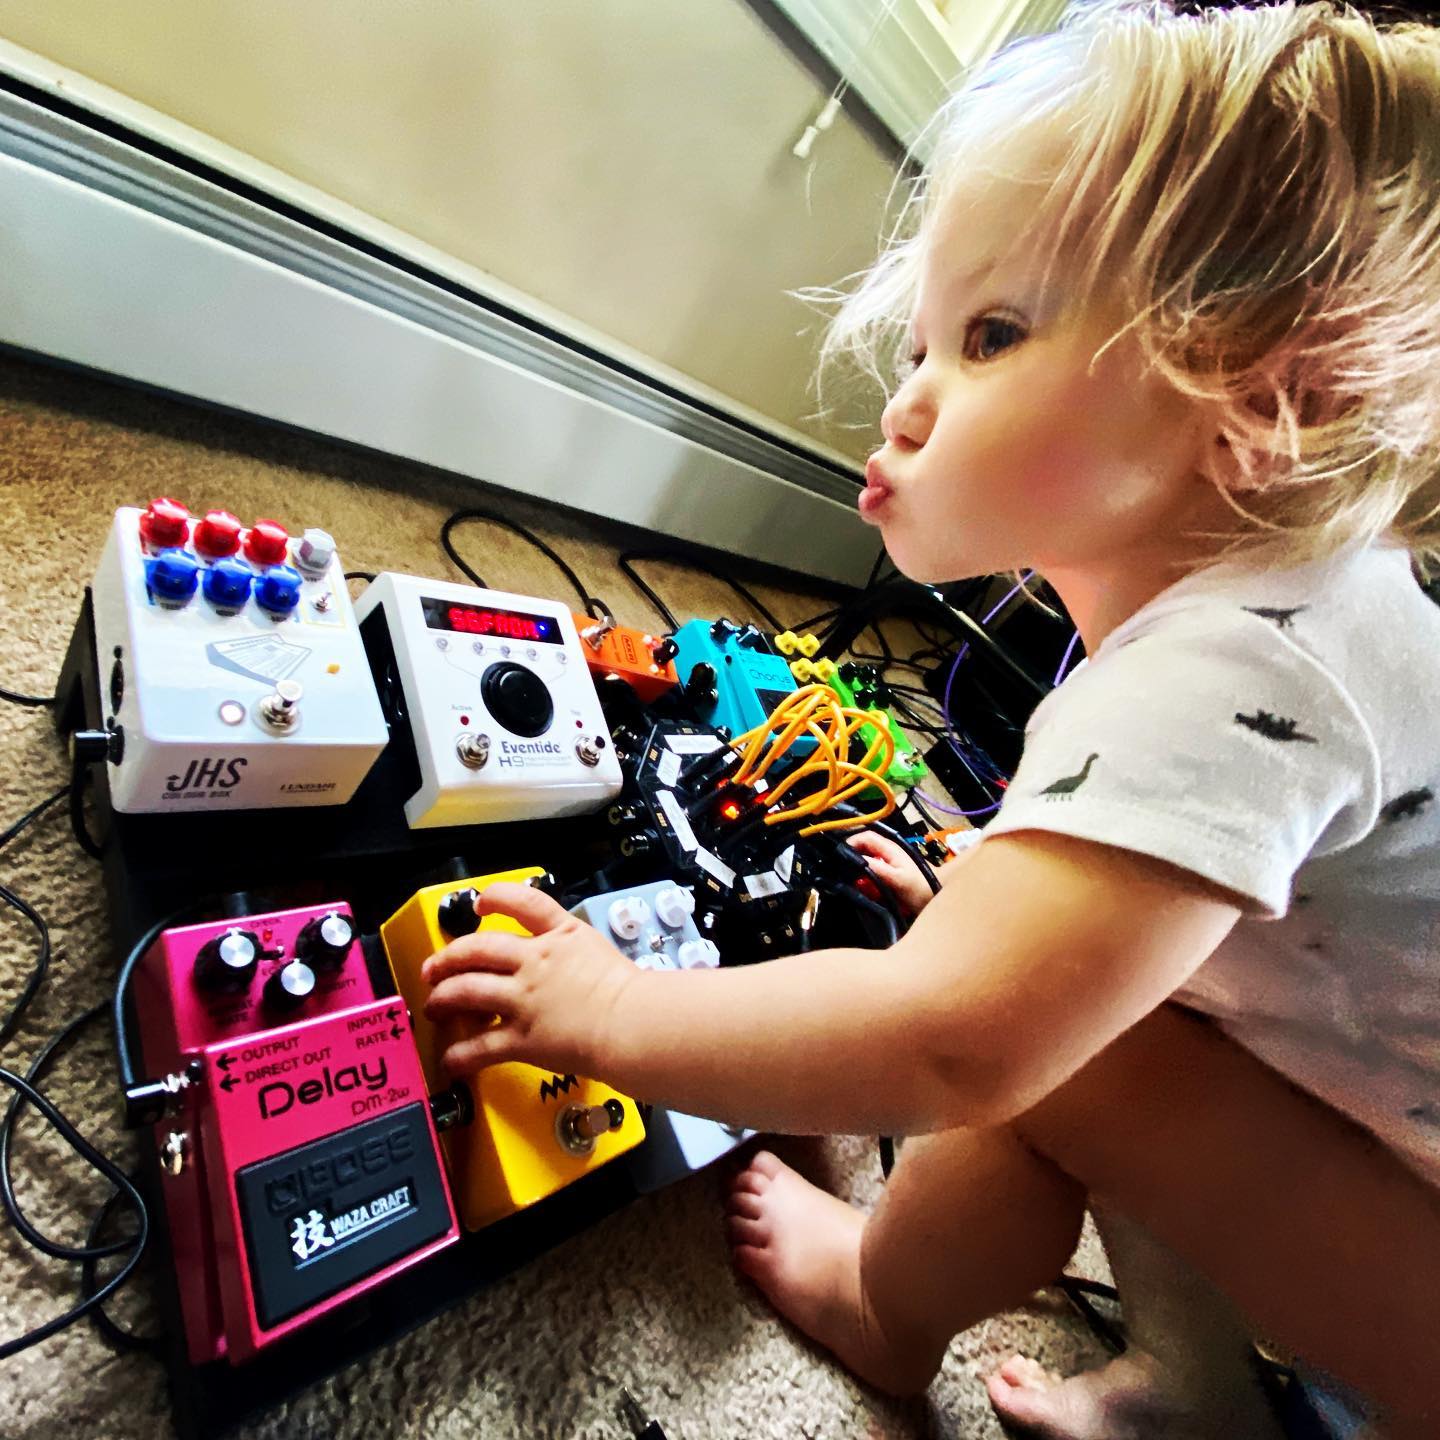 Violet and I are repatching the pedalboard with a Patchulator 8000